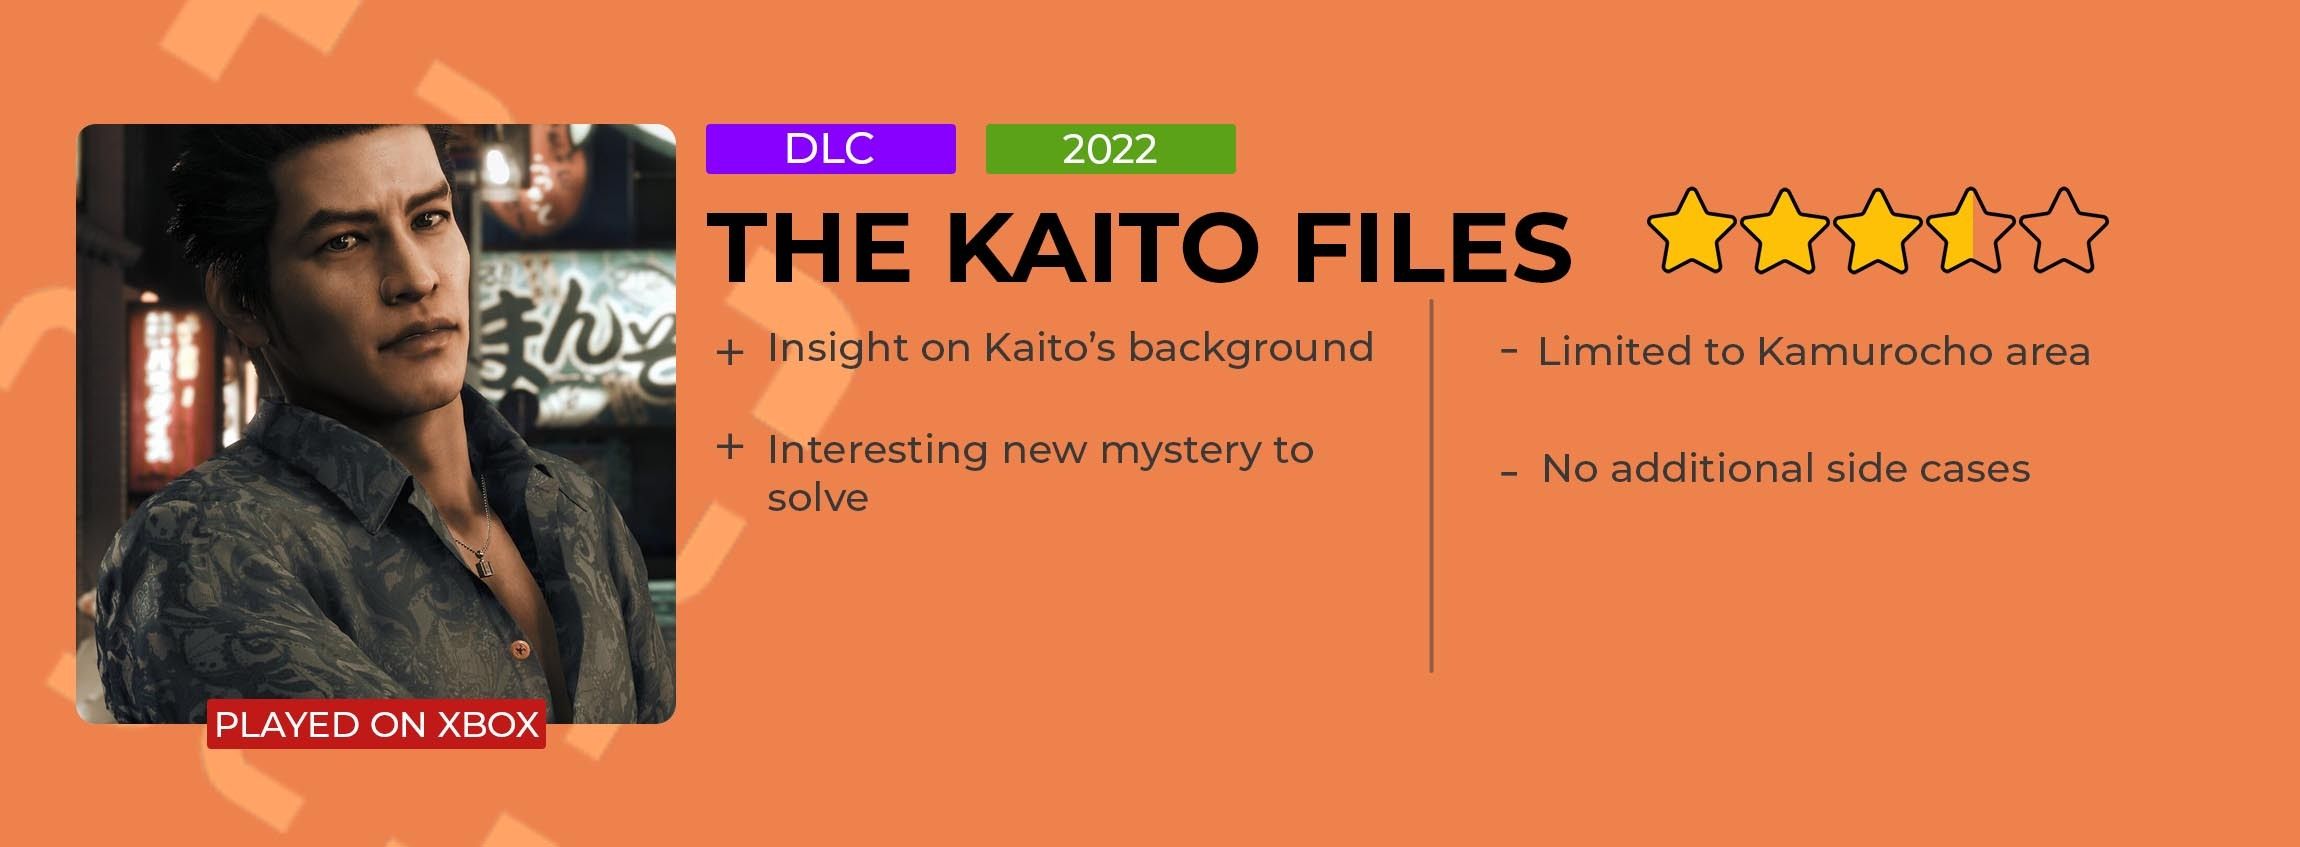 The Kaito Files Review Card